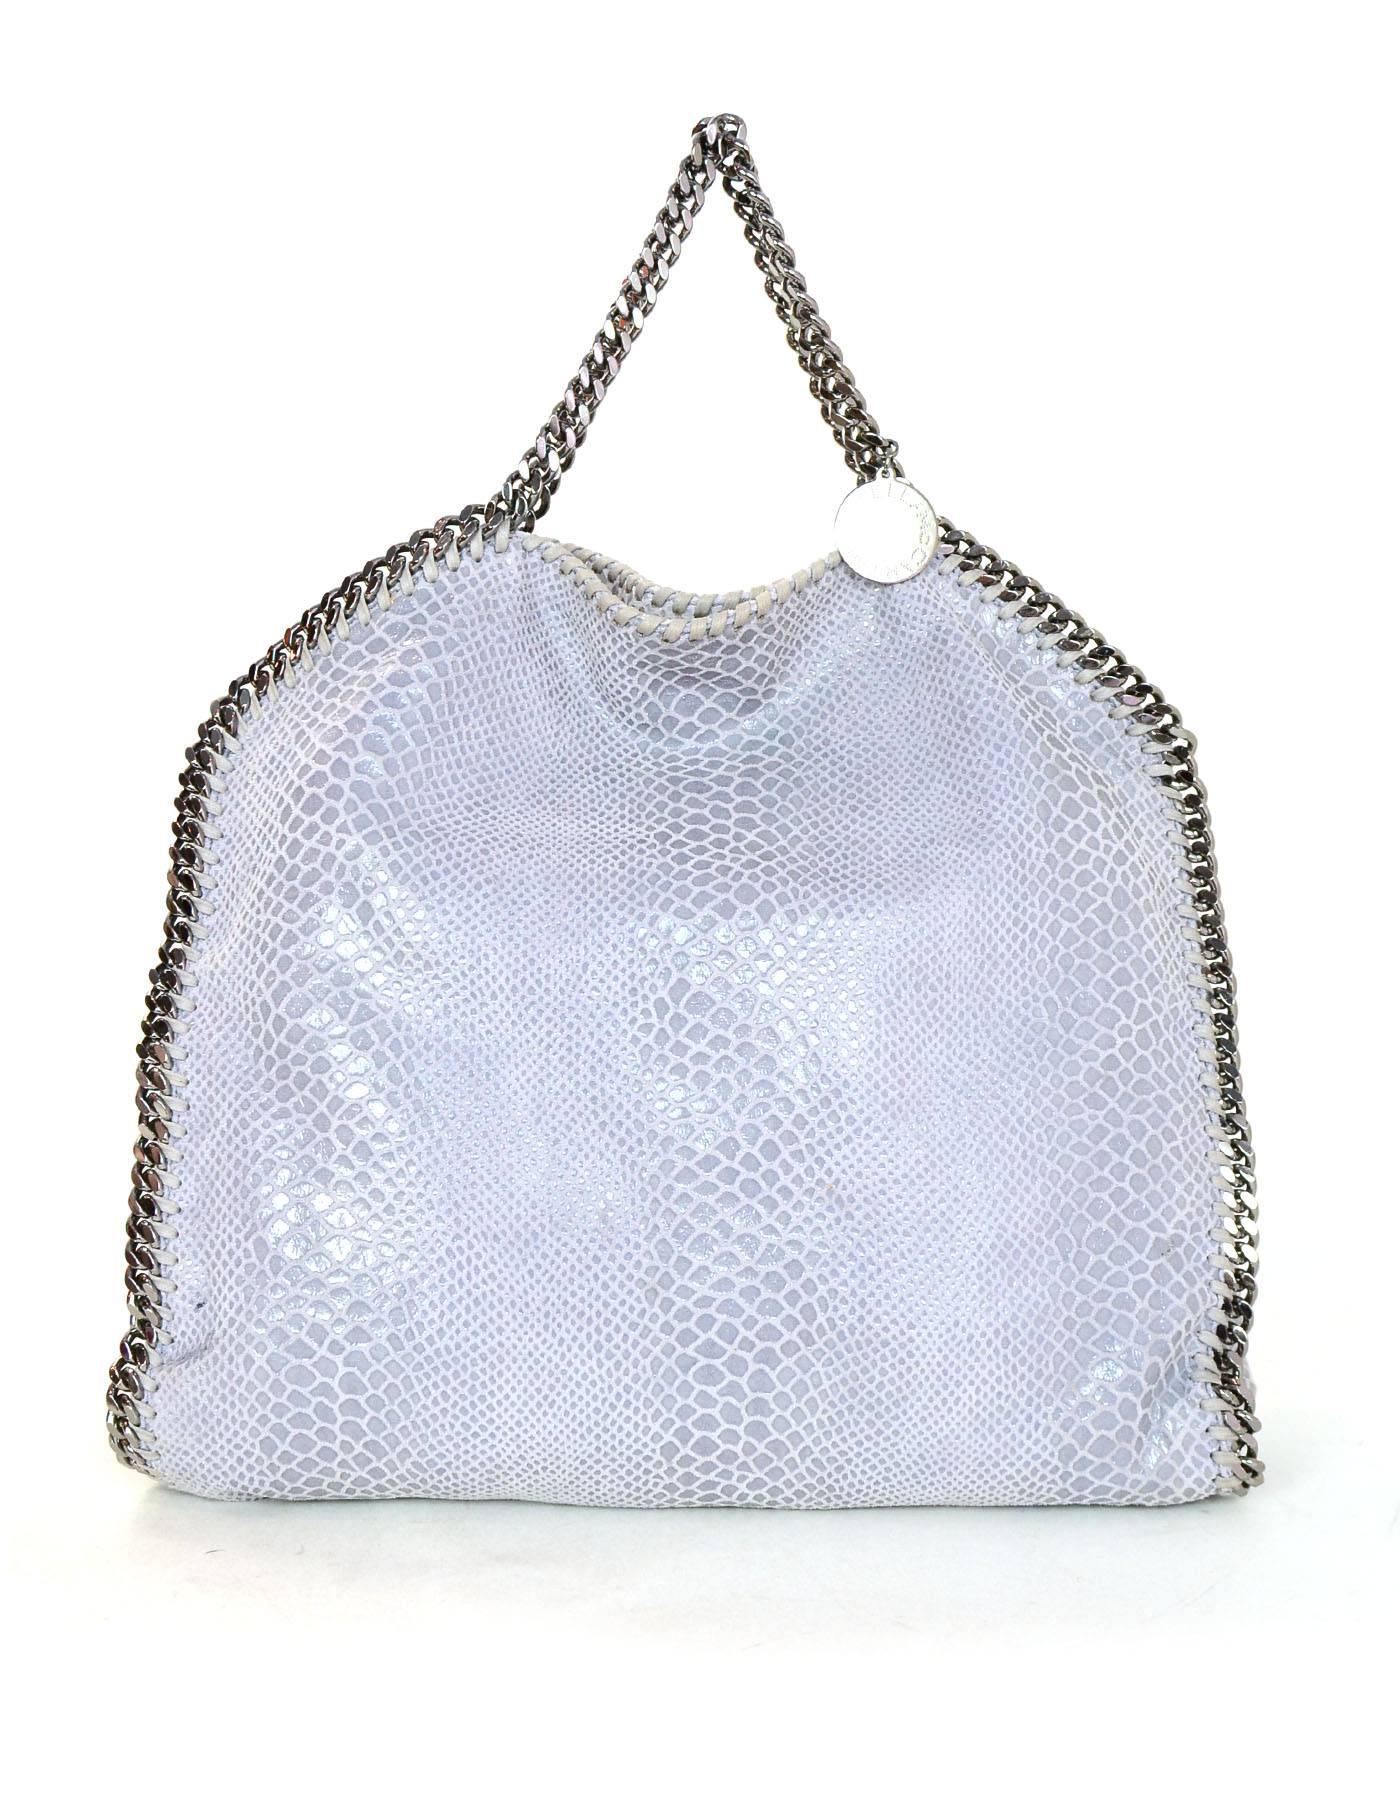 Stella McCartney Heather Grey Embossed Python Falabella Satchel

Made In: Italy
Color: Heather grey
Hardware: Silvertone
Materials: Vegan leather
Lining: Black textile 
Closure/Opening: Flap top with magnetic snap closure
Exterior Pockets: